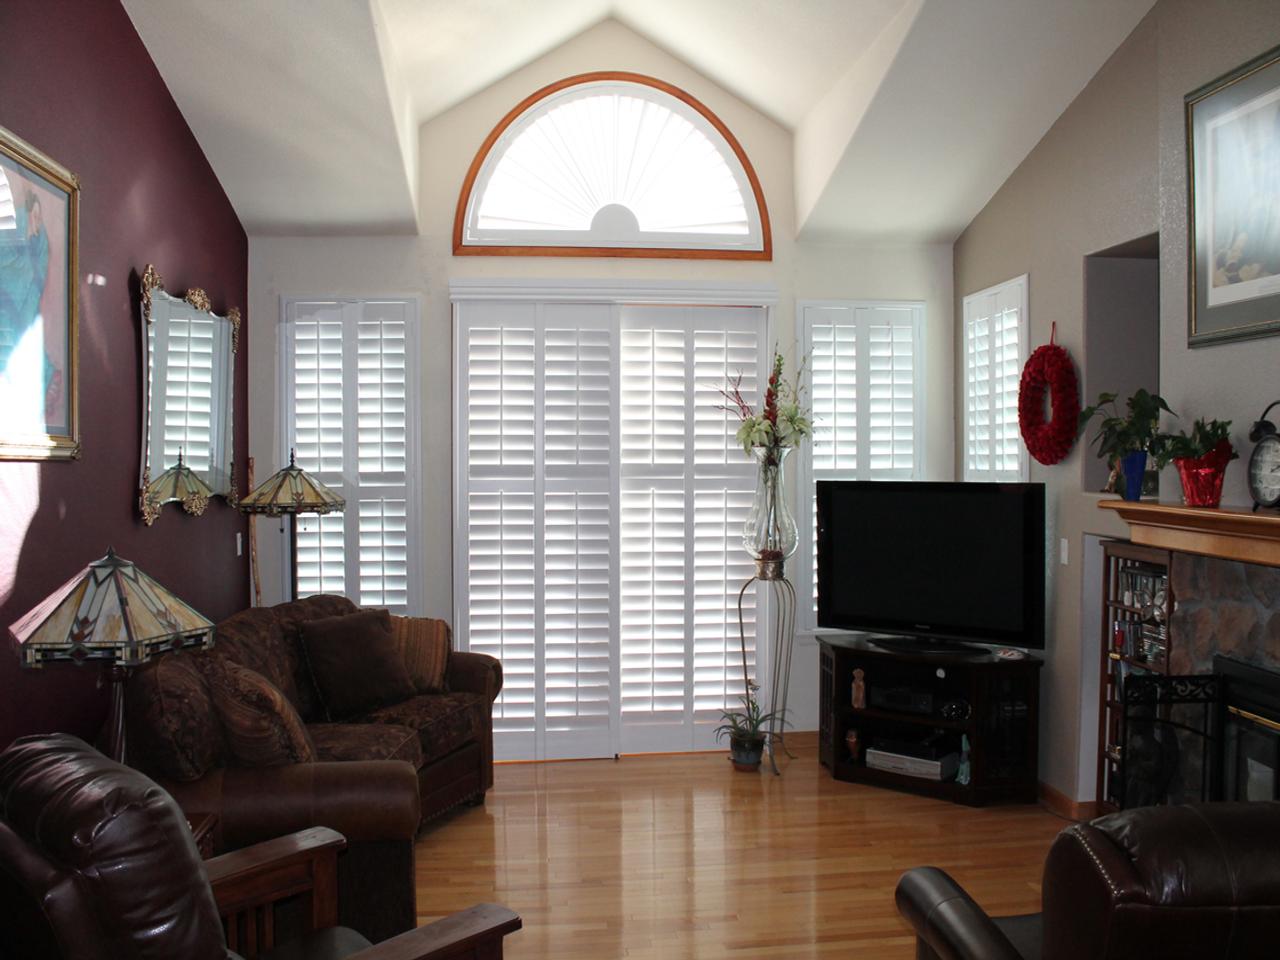 Sliding glass doors with arch over them. Doors and arched window covered with plantation shutters